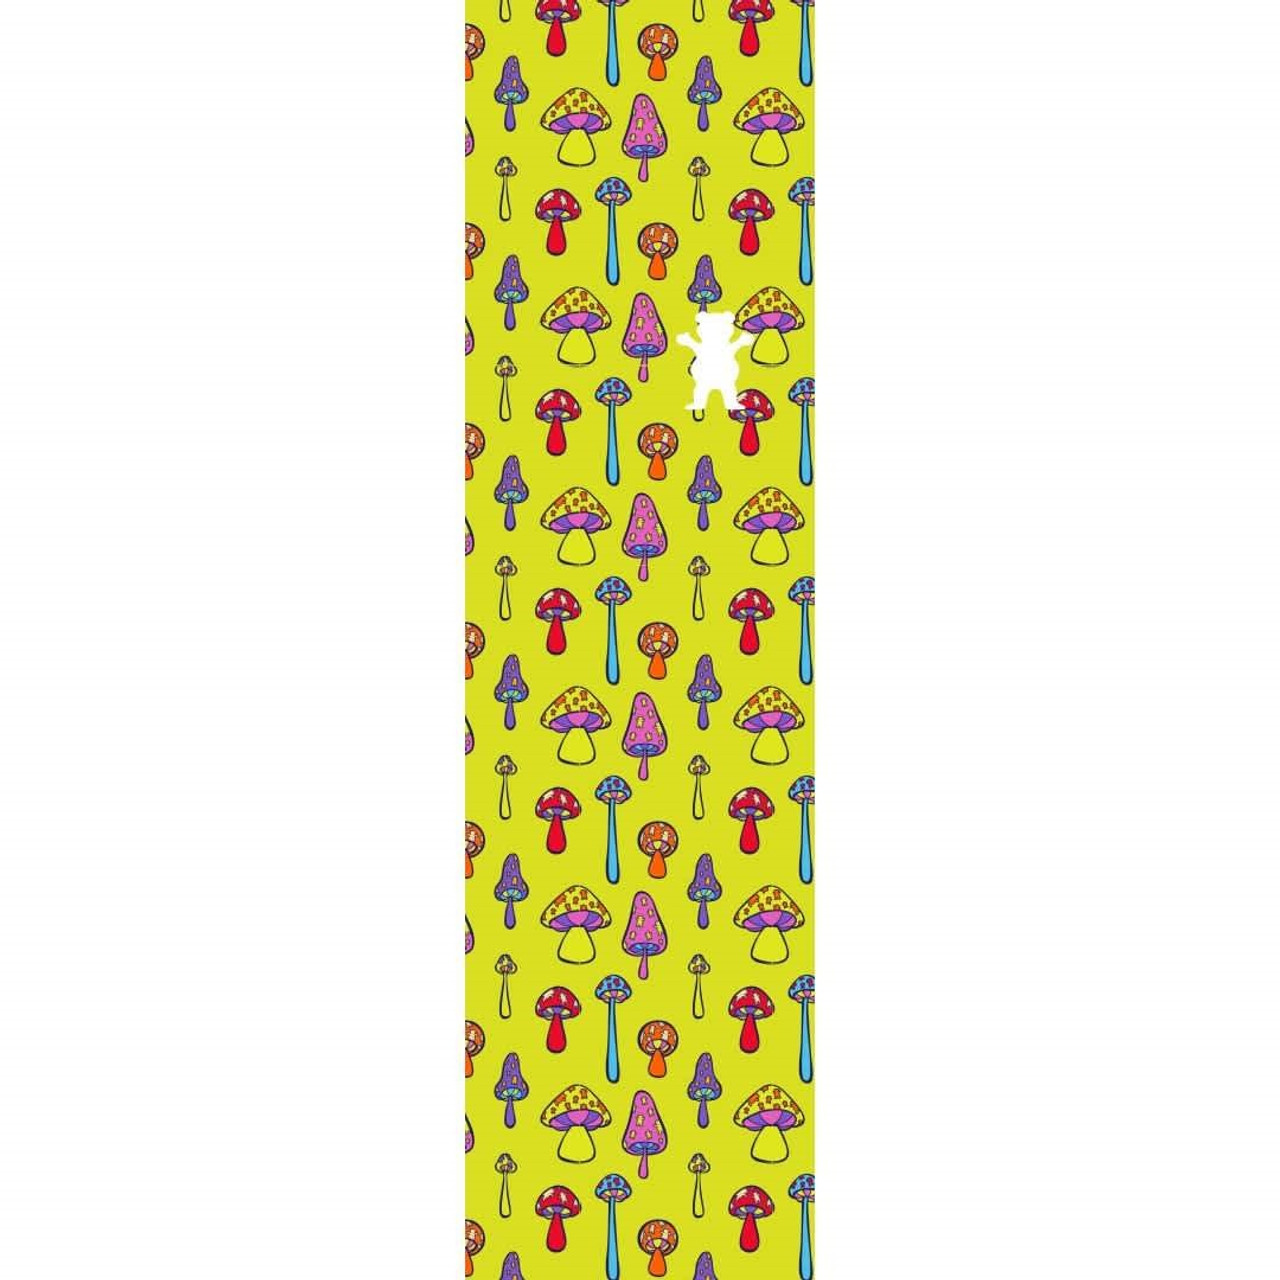 Grizzly Have A Nice Day Grip Tape Sheet Lime 9x33